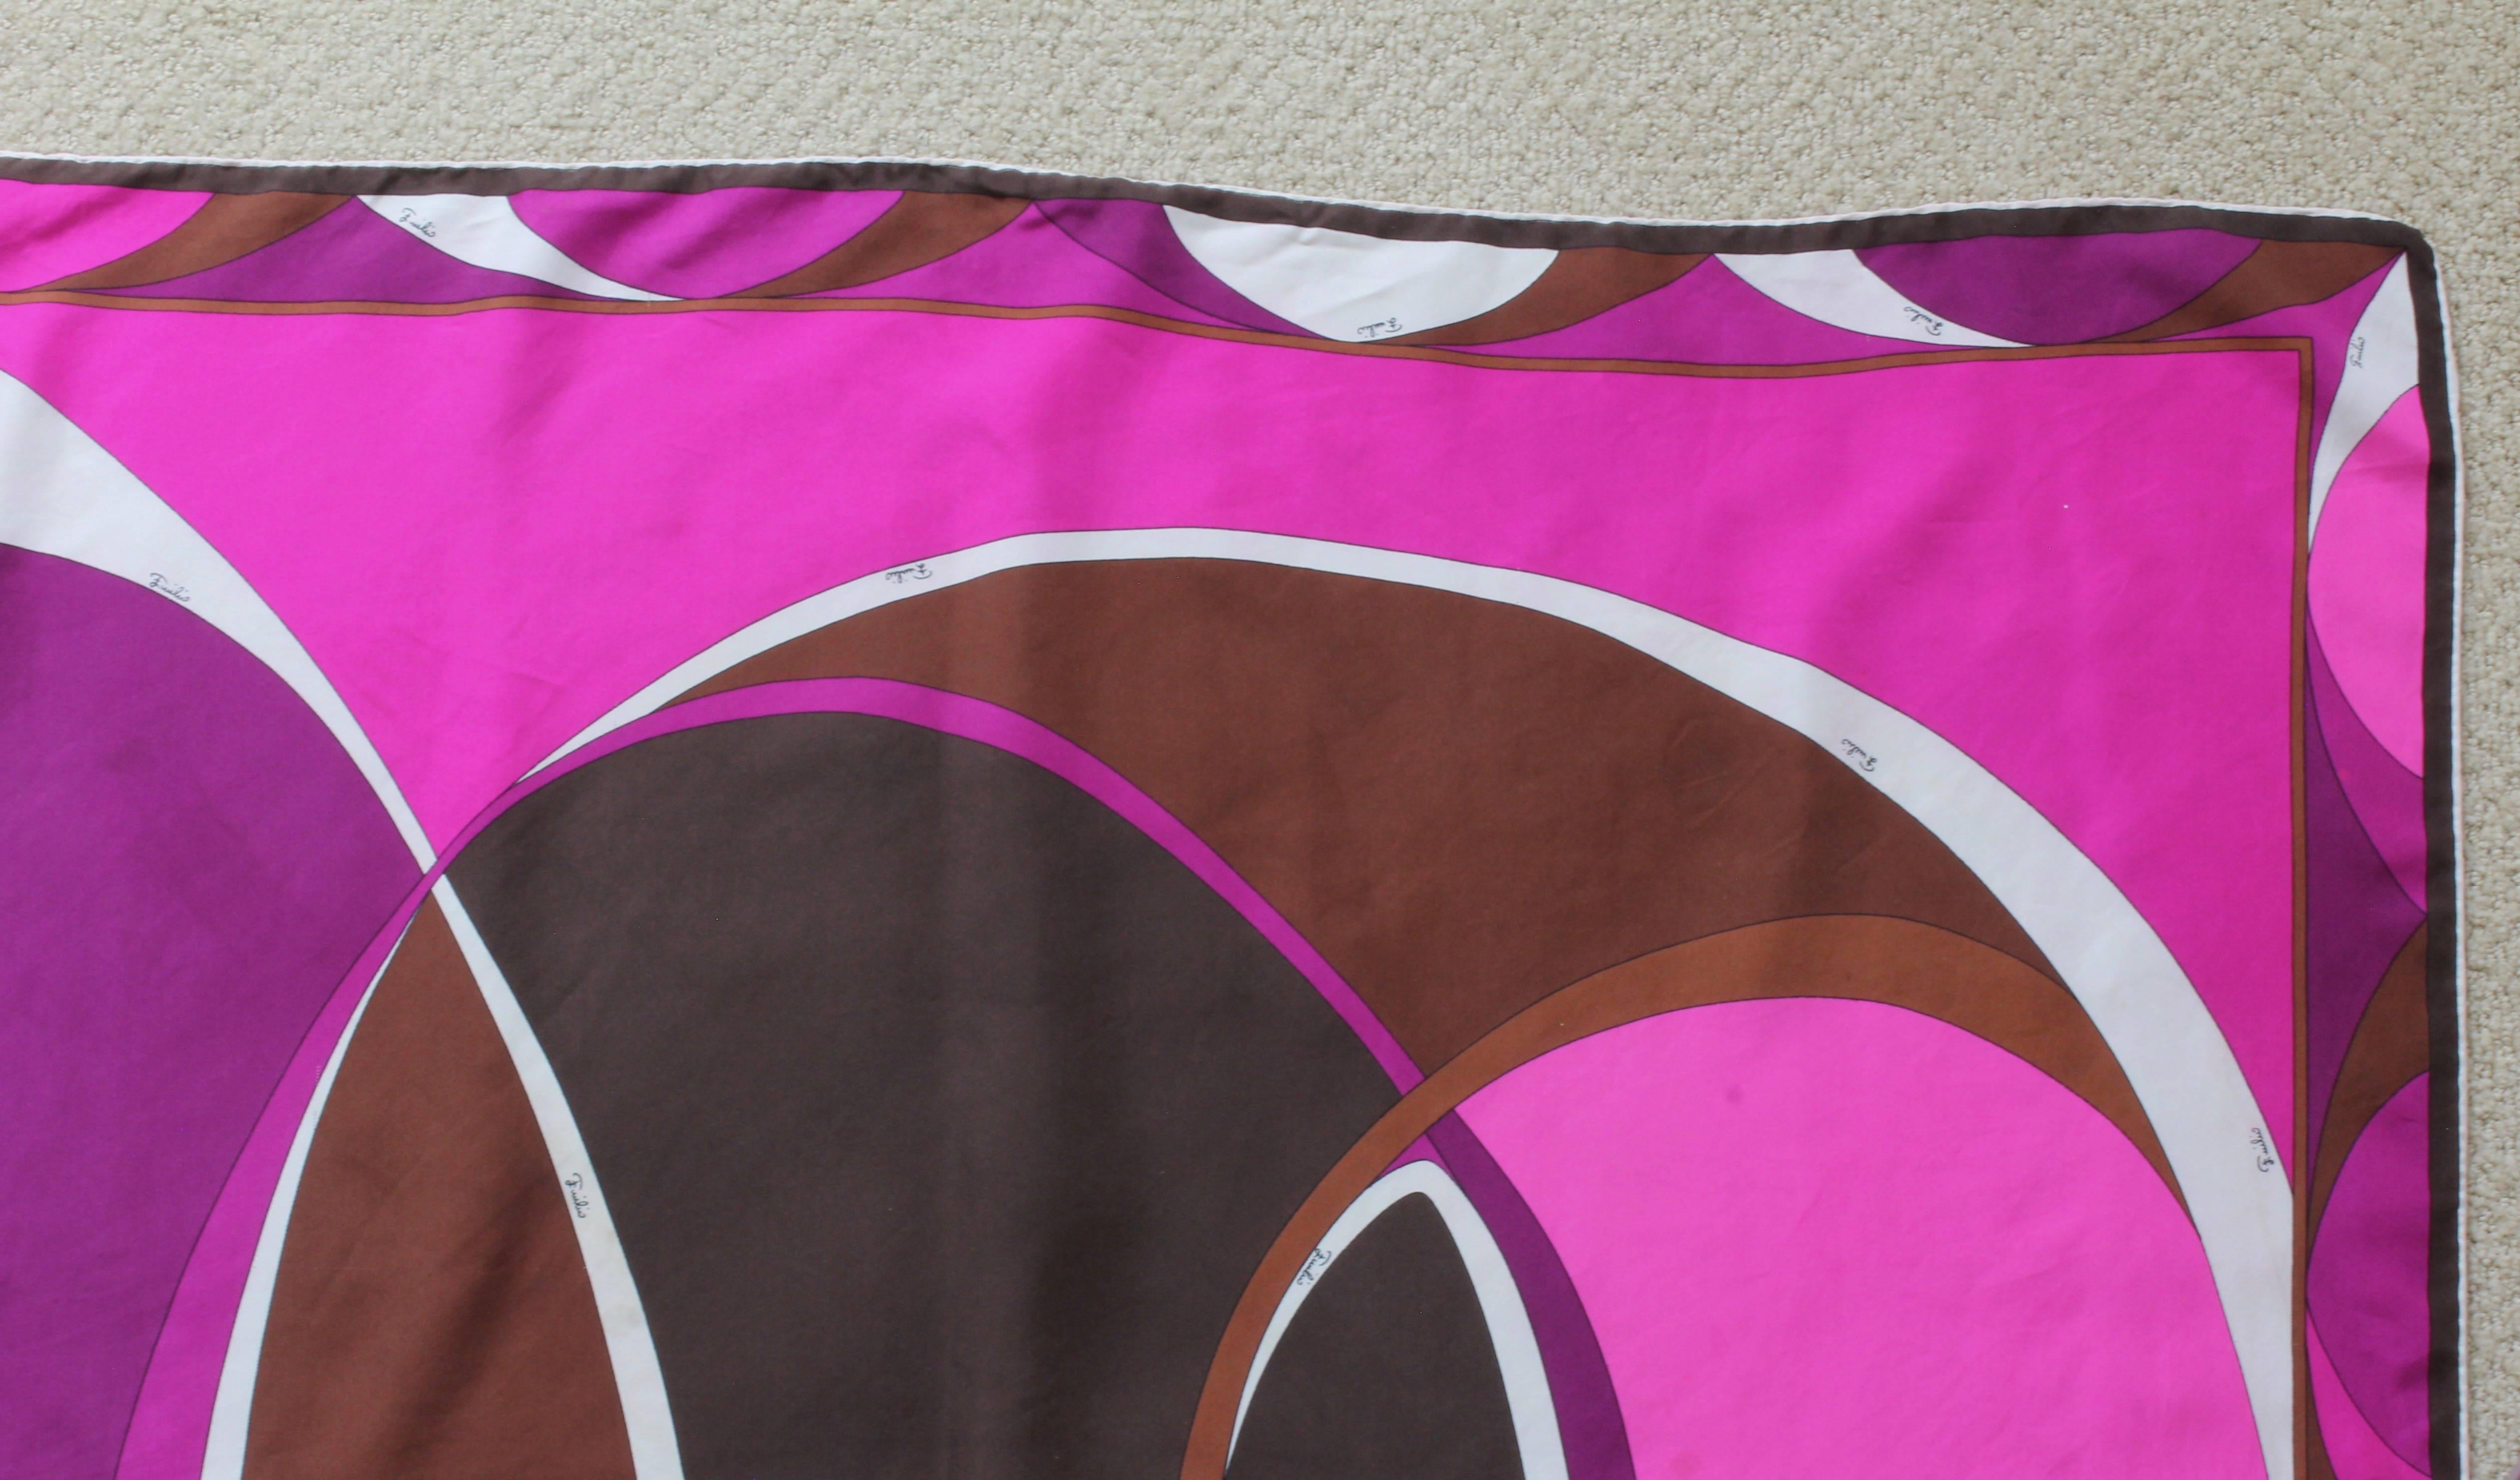 Emilio Pucci Abstract Print Scarf Shawl Silk Twill 35in Purple Brown Pink White In Good Condition For Sale In Port Saint Lucie, FL